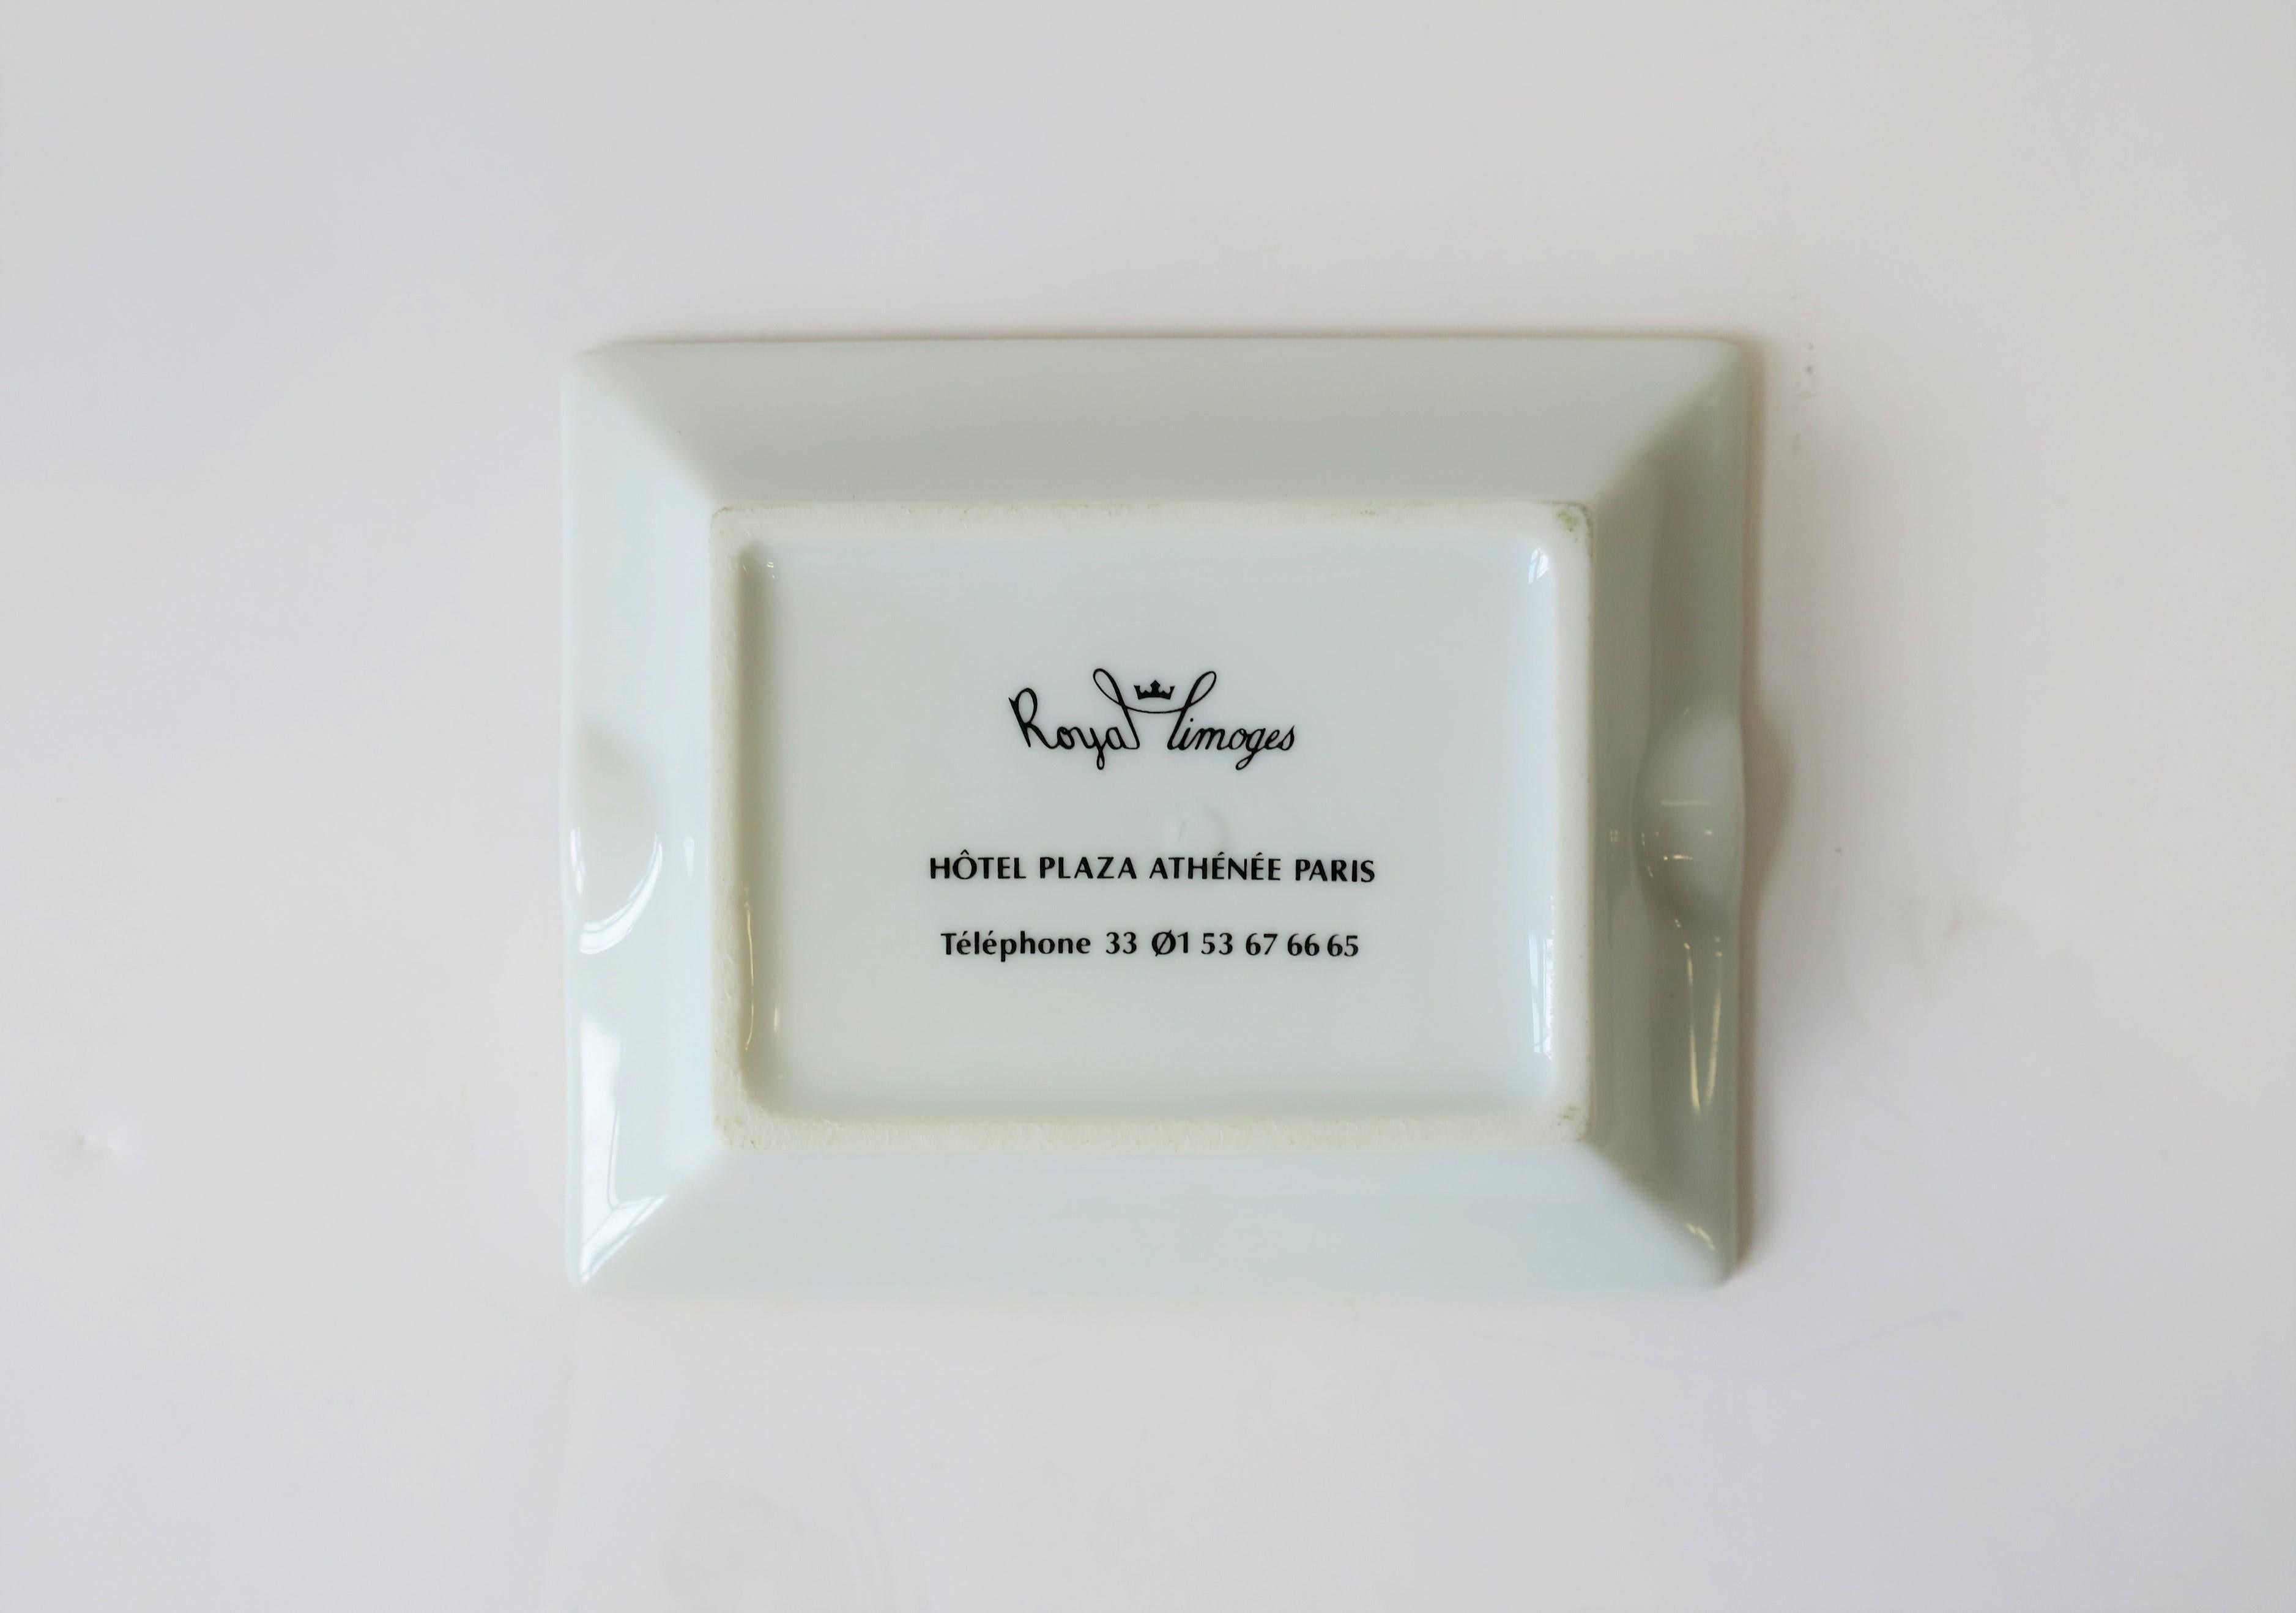 A small rectangular French Limoges white and gold porcelain dish or ashtray from the Hotel Plaza Athenee, Paris, France. With maker's mark on back as shown in image #2. Made by Limoges, France. This small dish serves as a nice piece to hold jewelry,